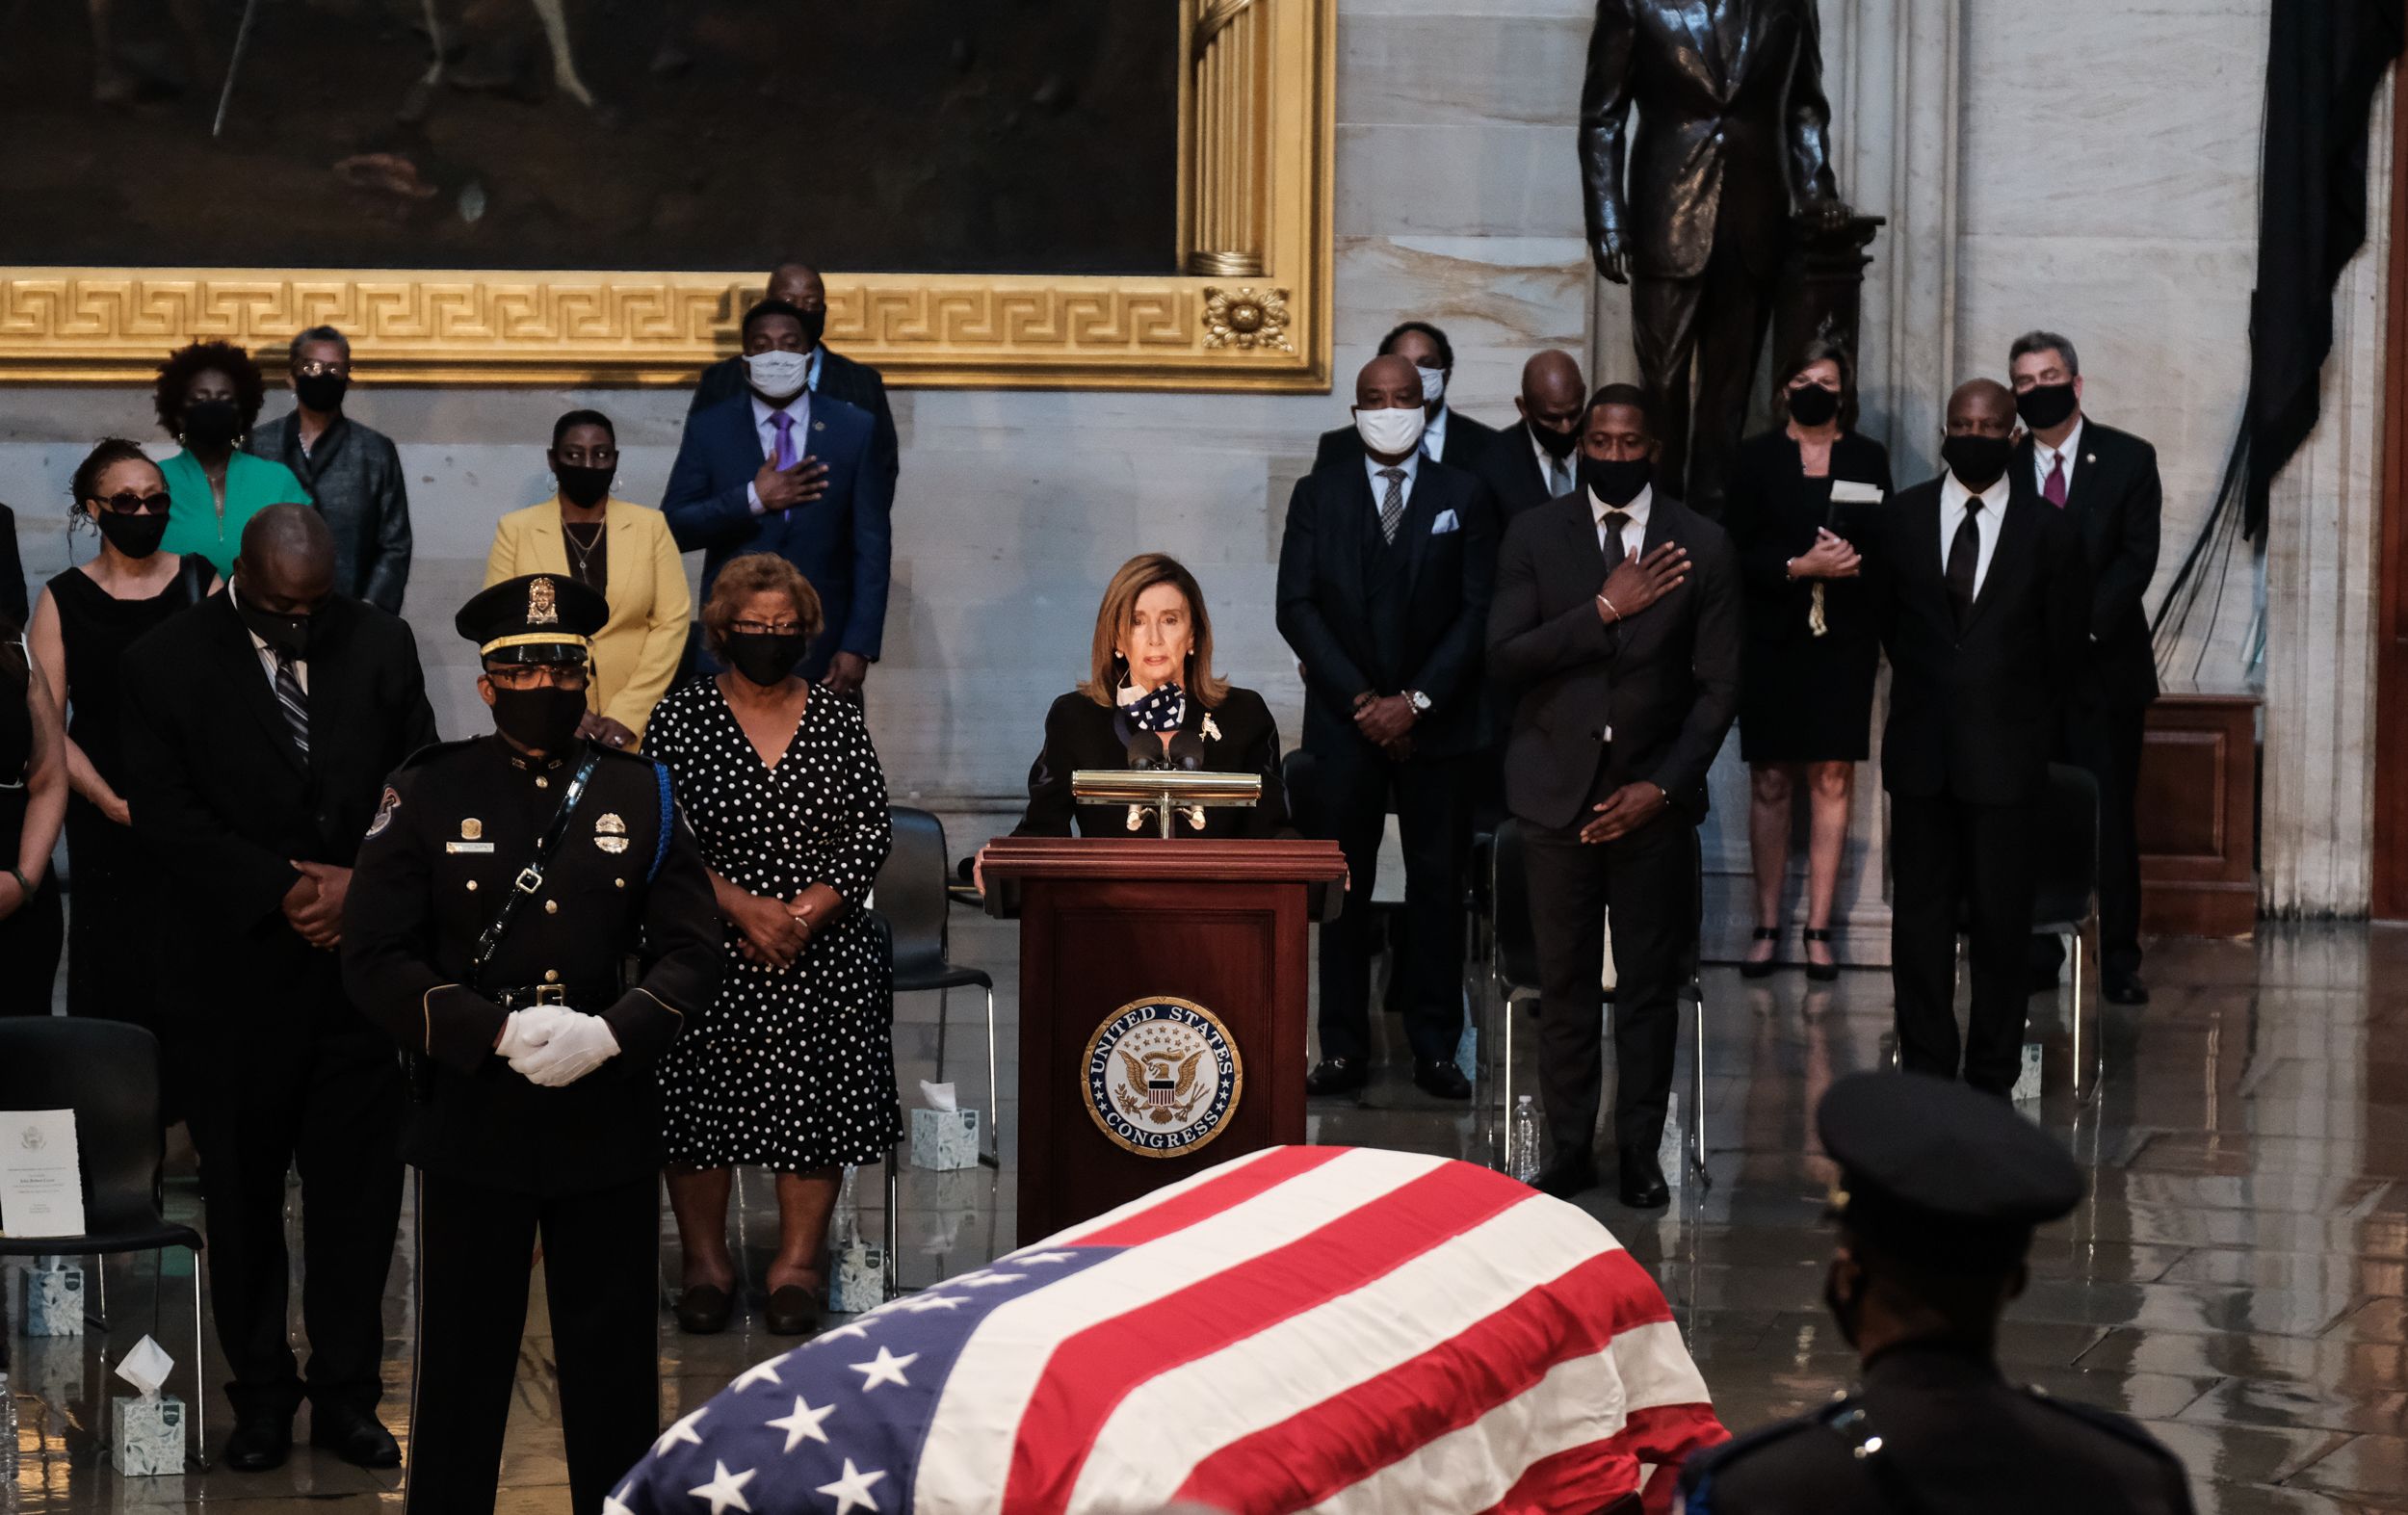 Pelosi paying her respects to John Lewis